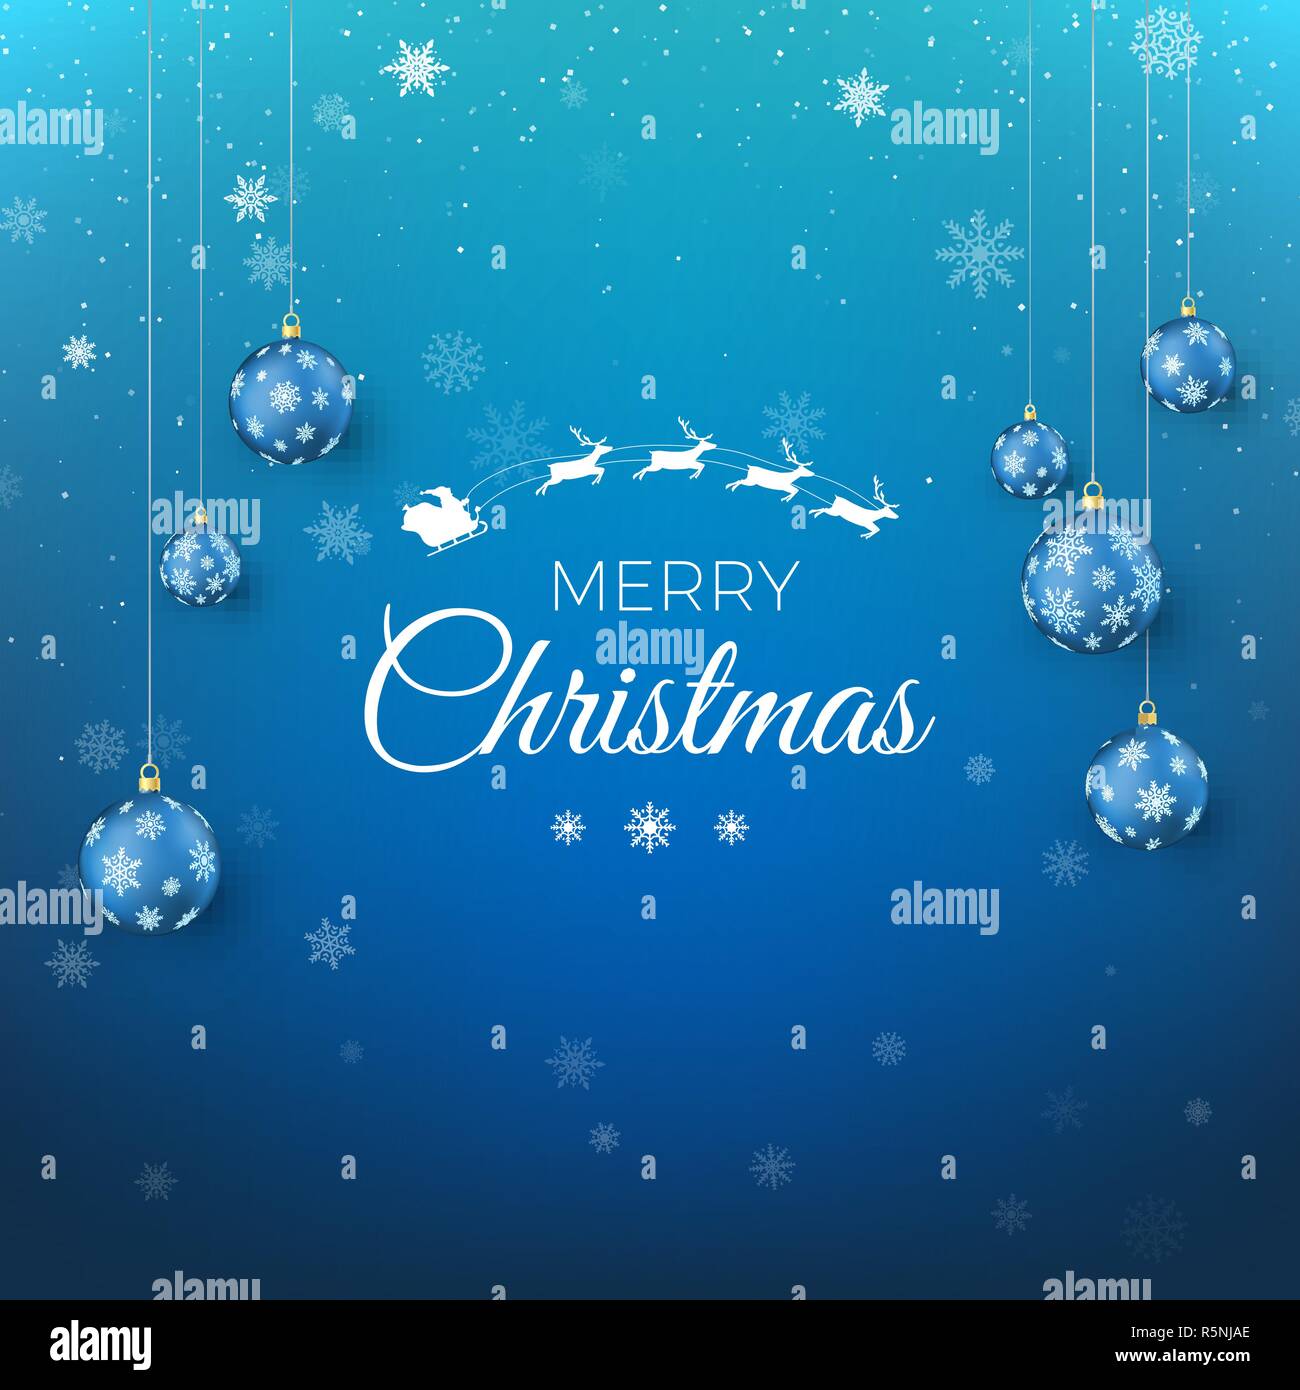 Merry Christmas greeting card. Santa Claus fly in sky and greeting text. Blue background with snowflakes decorated by Christmas balls. Vector illustra Stock Vector